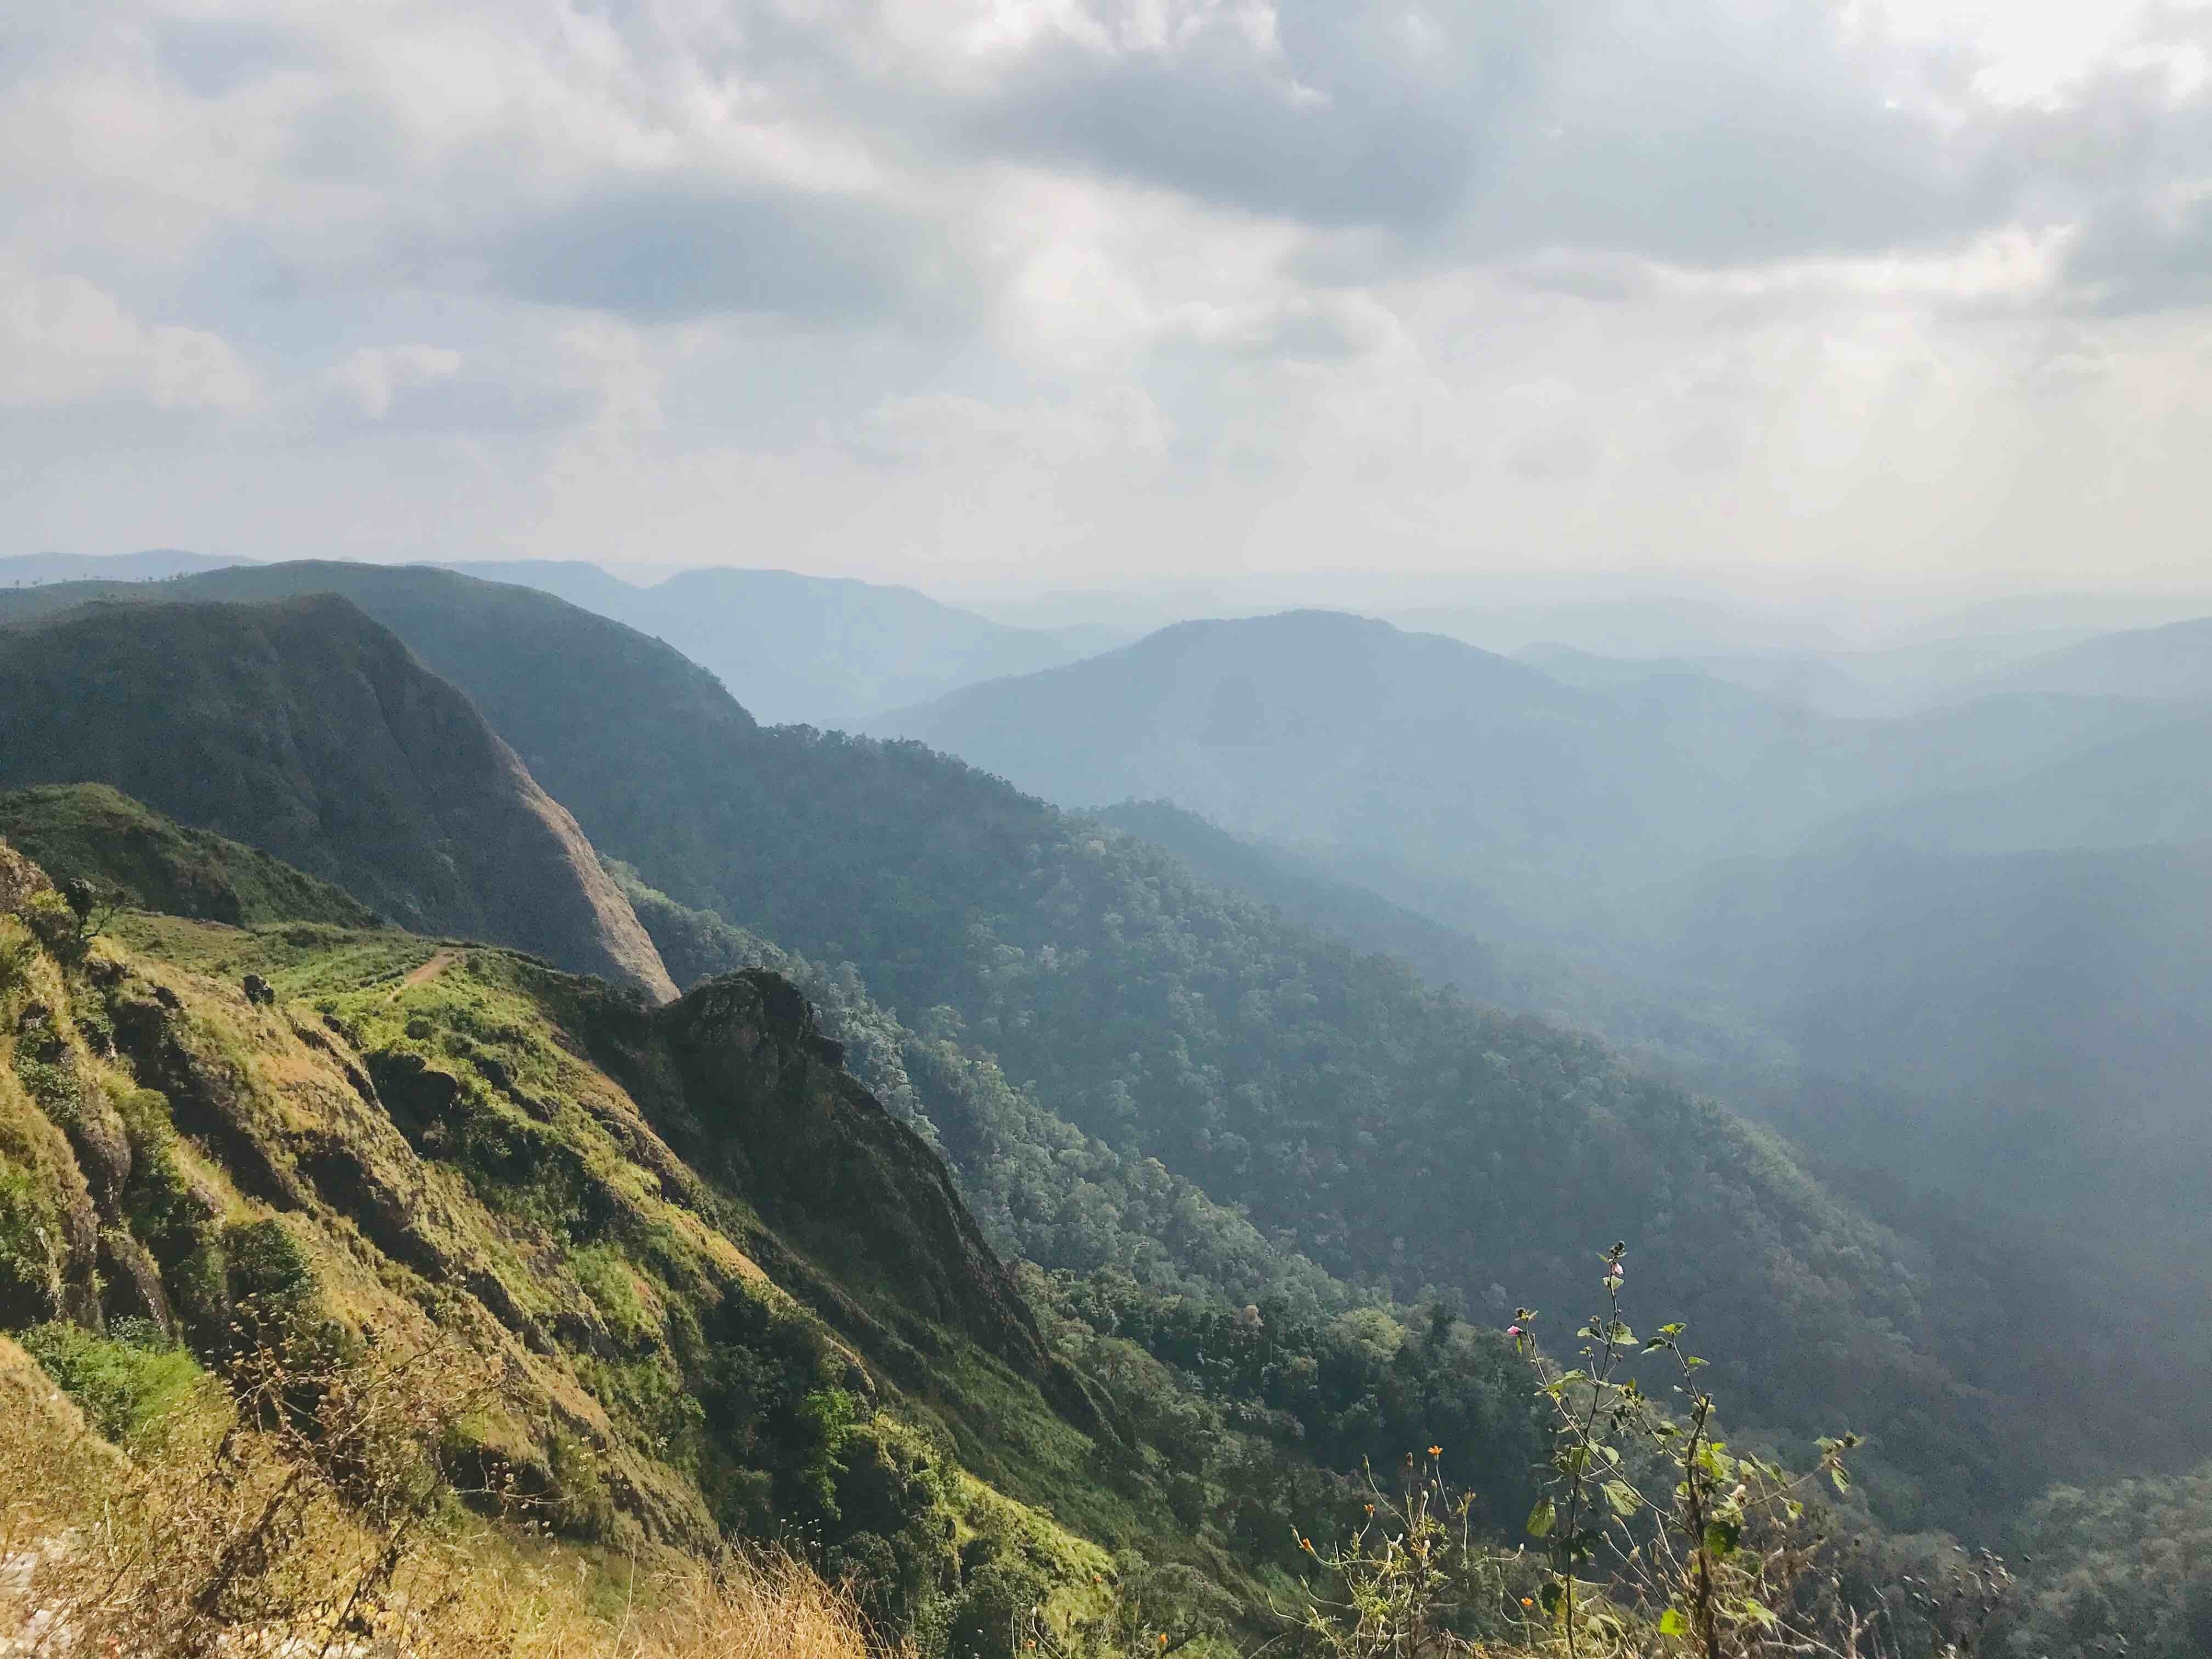 Mountains are the beginning &end of all natural scenery# Amazing landscapes#Eagle Rock#Trekking #Hiking#GreatOutdoors#Idukki#Kerala #India#Perspectives